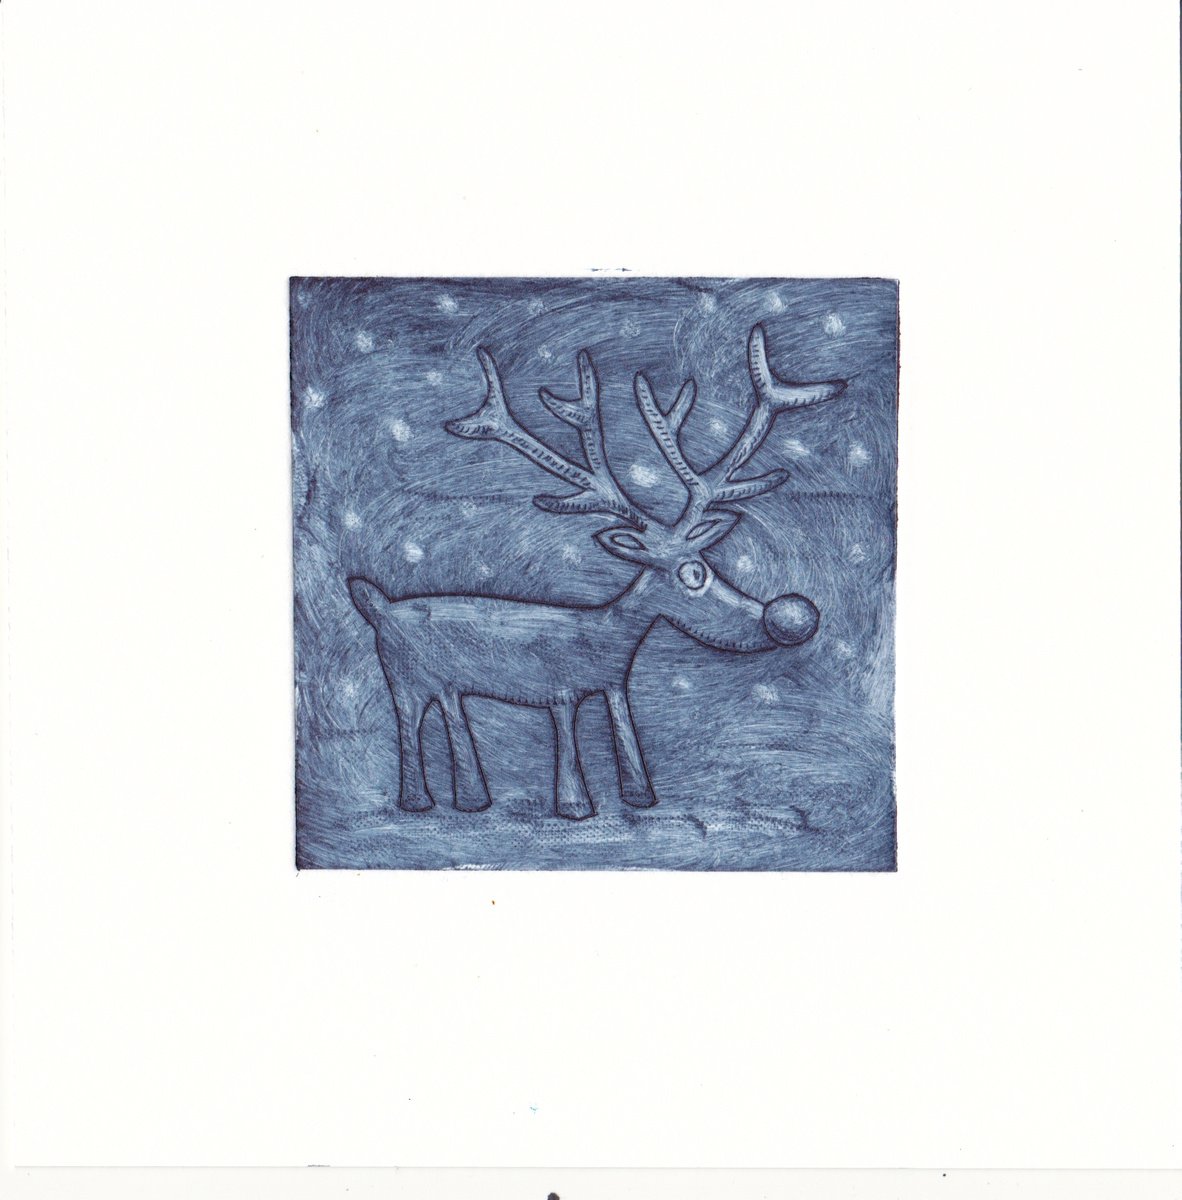 Little reindeer by Rory O’Neill